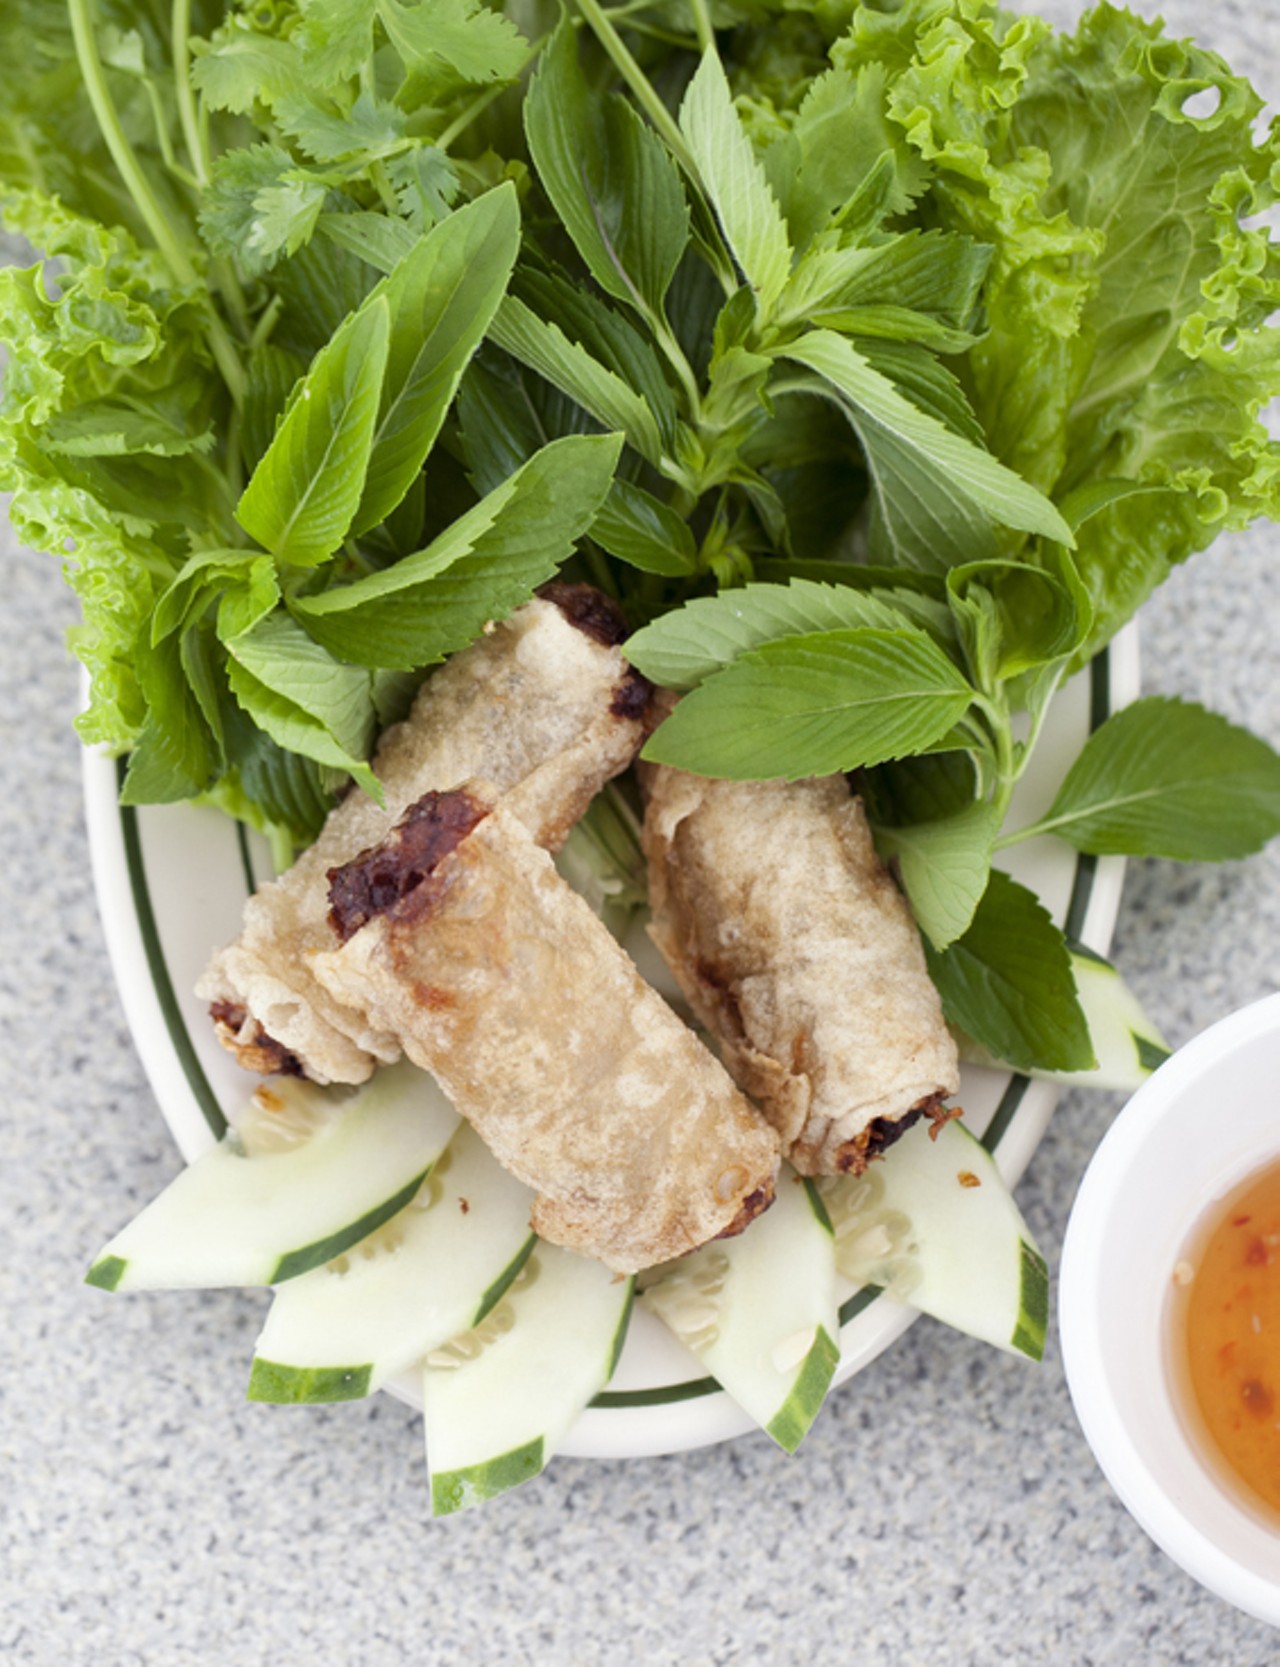 Appetizer - Cha Gio (Vietnamese eggrolls.) Made with ground pork, onion, lettuce, cilantro and cucumber.